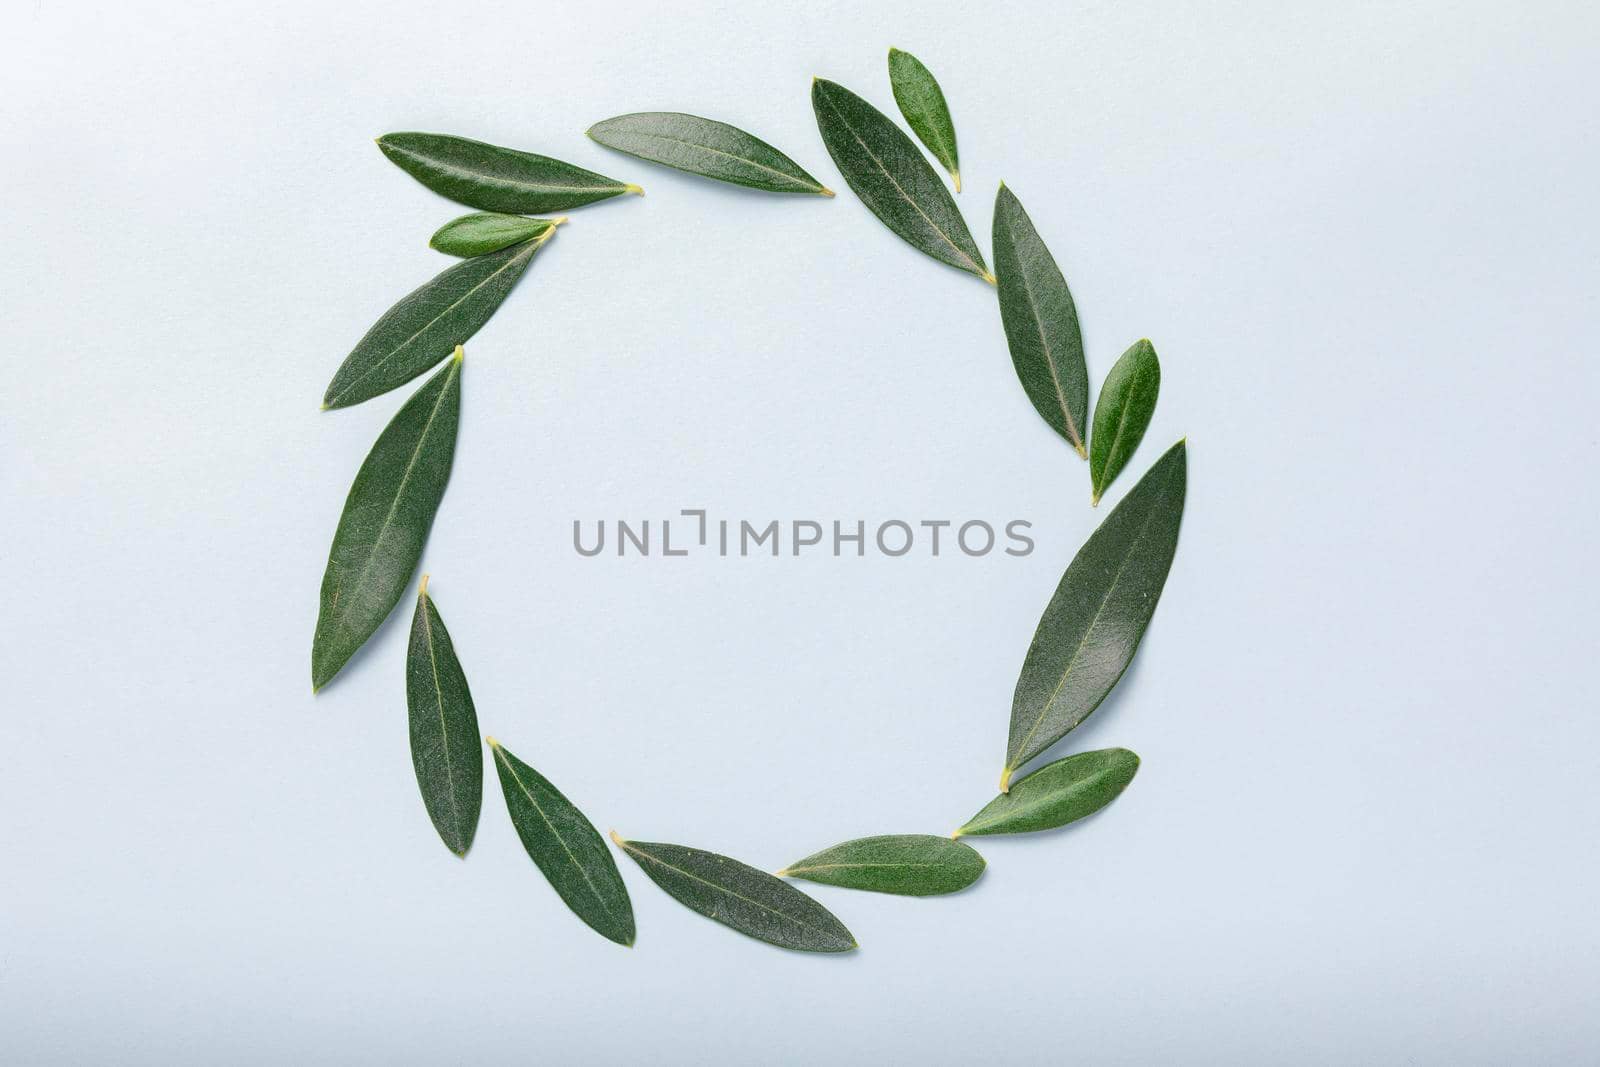 A circular wreath formed with olive leaves by alvarobueno